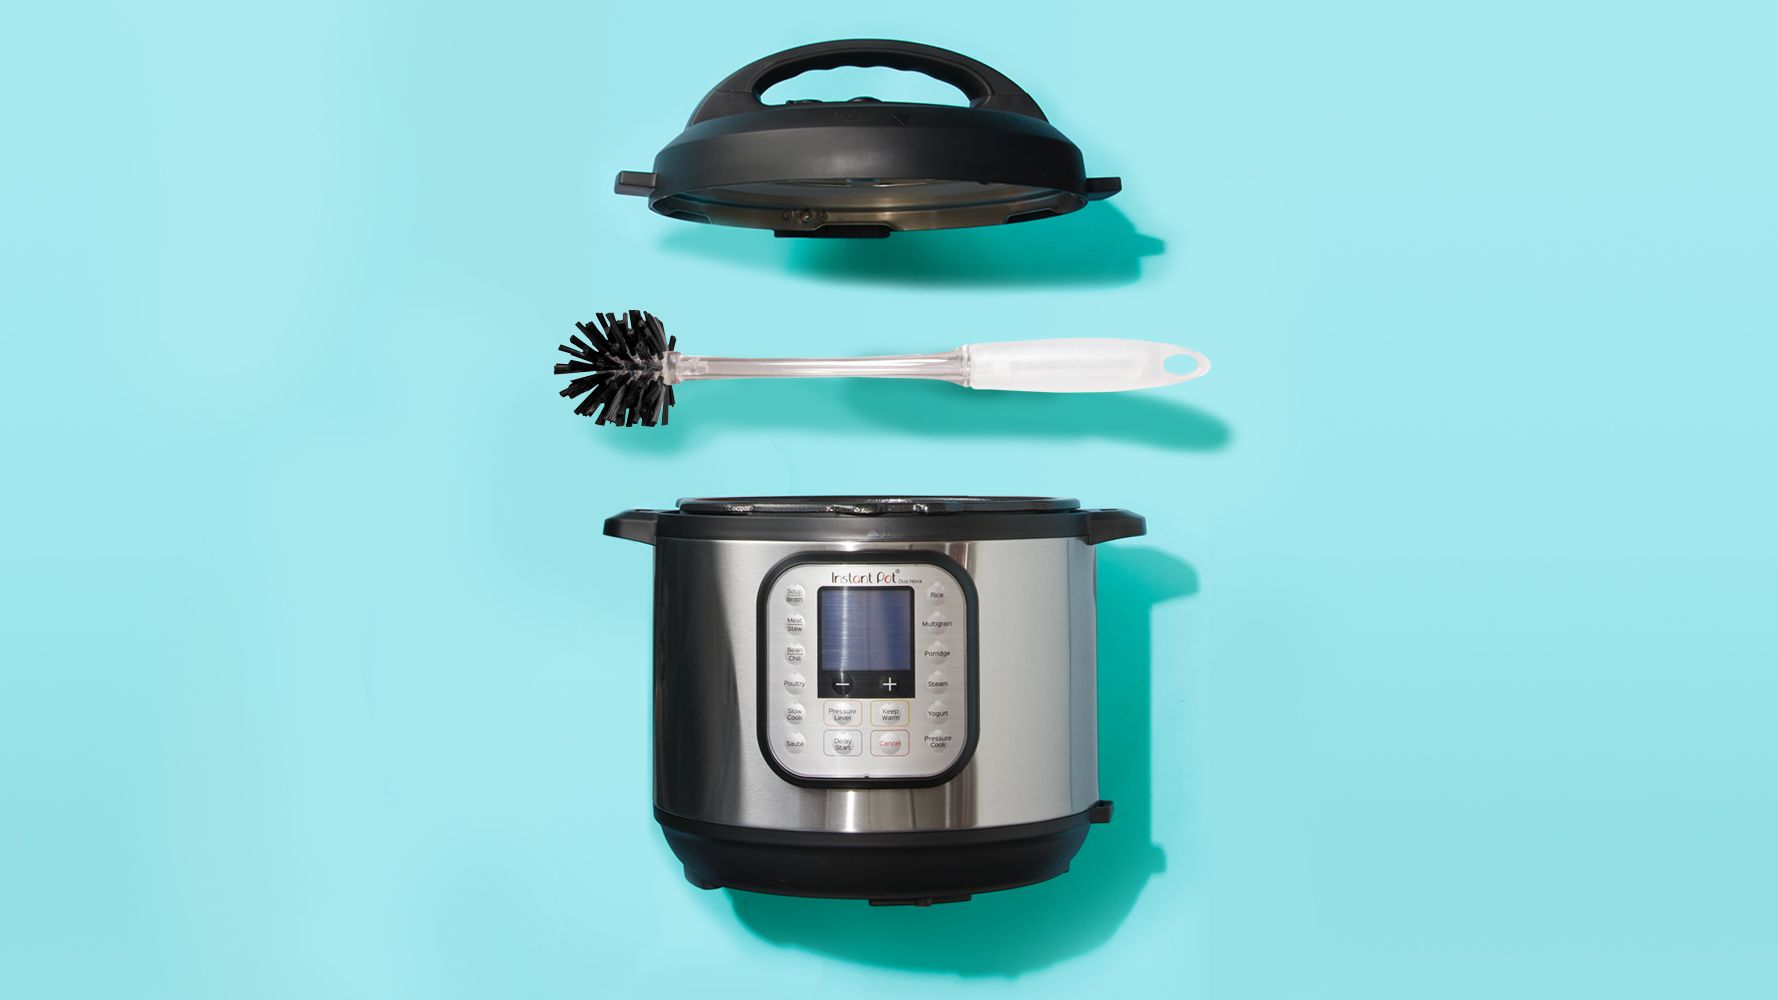 https://hips.hearstapps.com/hmg-prod/images/how-to-clean-instant-pot-2-1626358401.jpg?crop=0.888888888888889xw:1xh;center,top